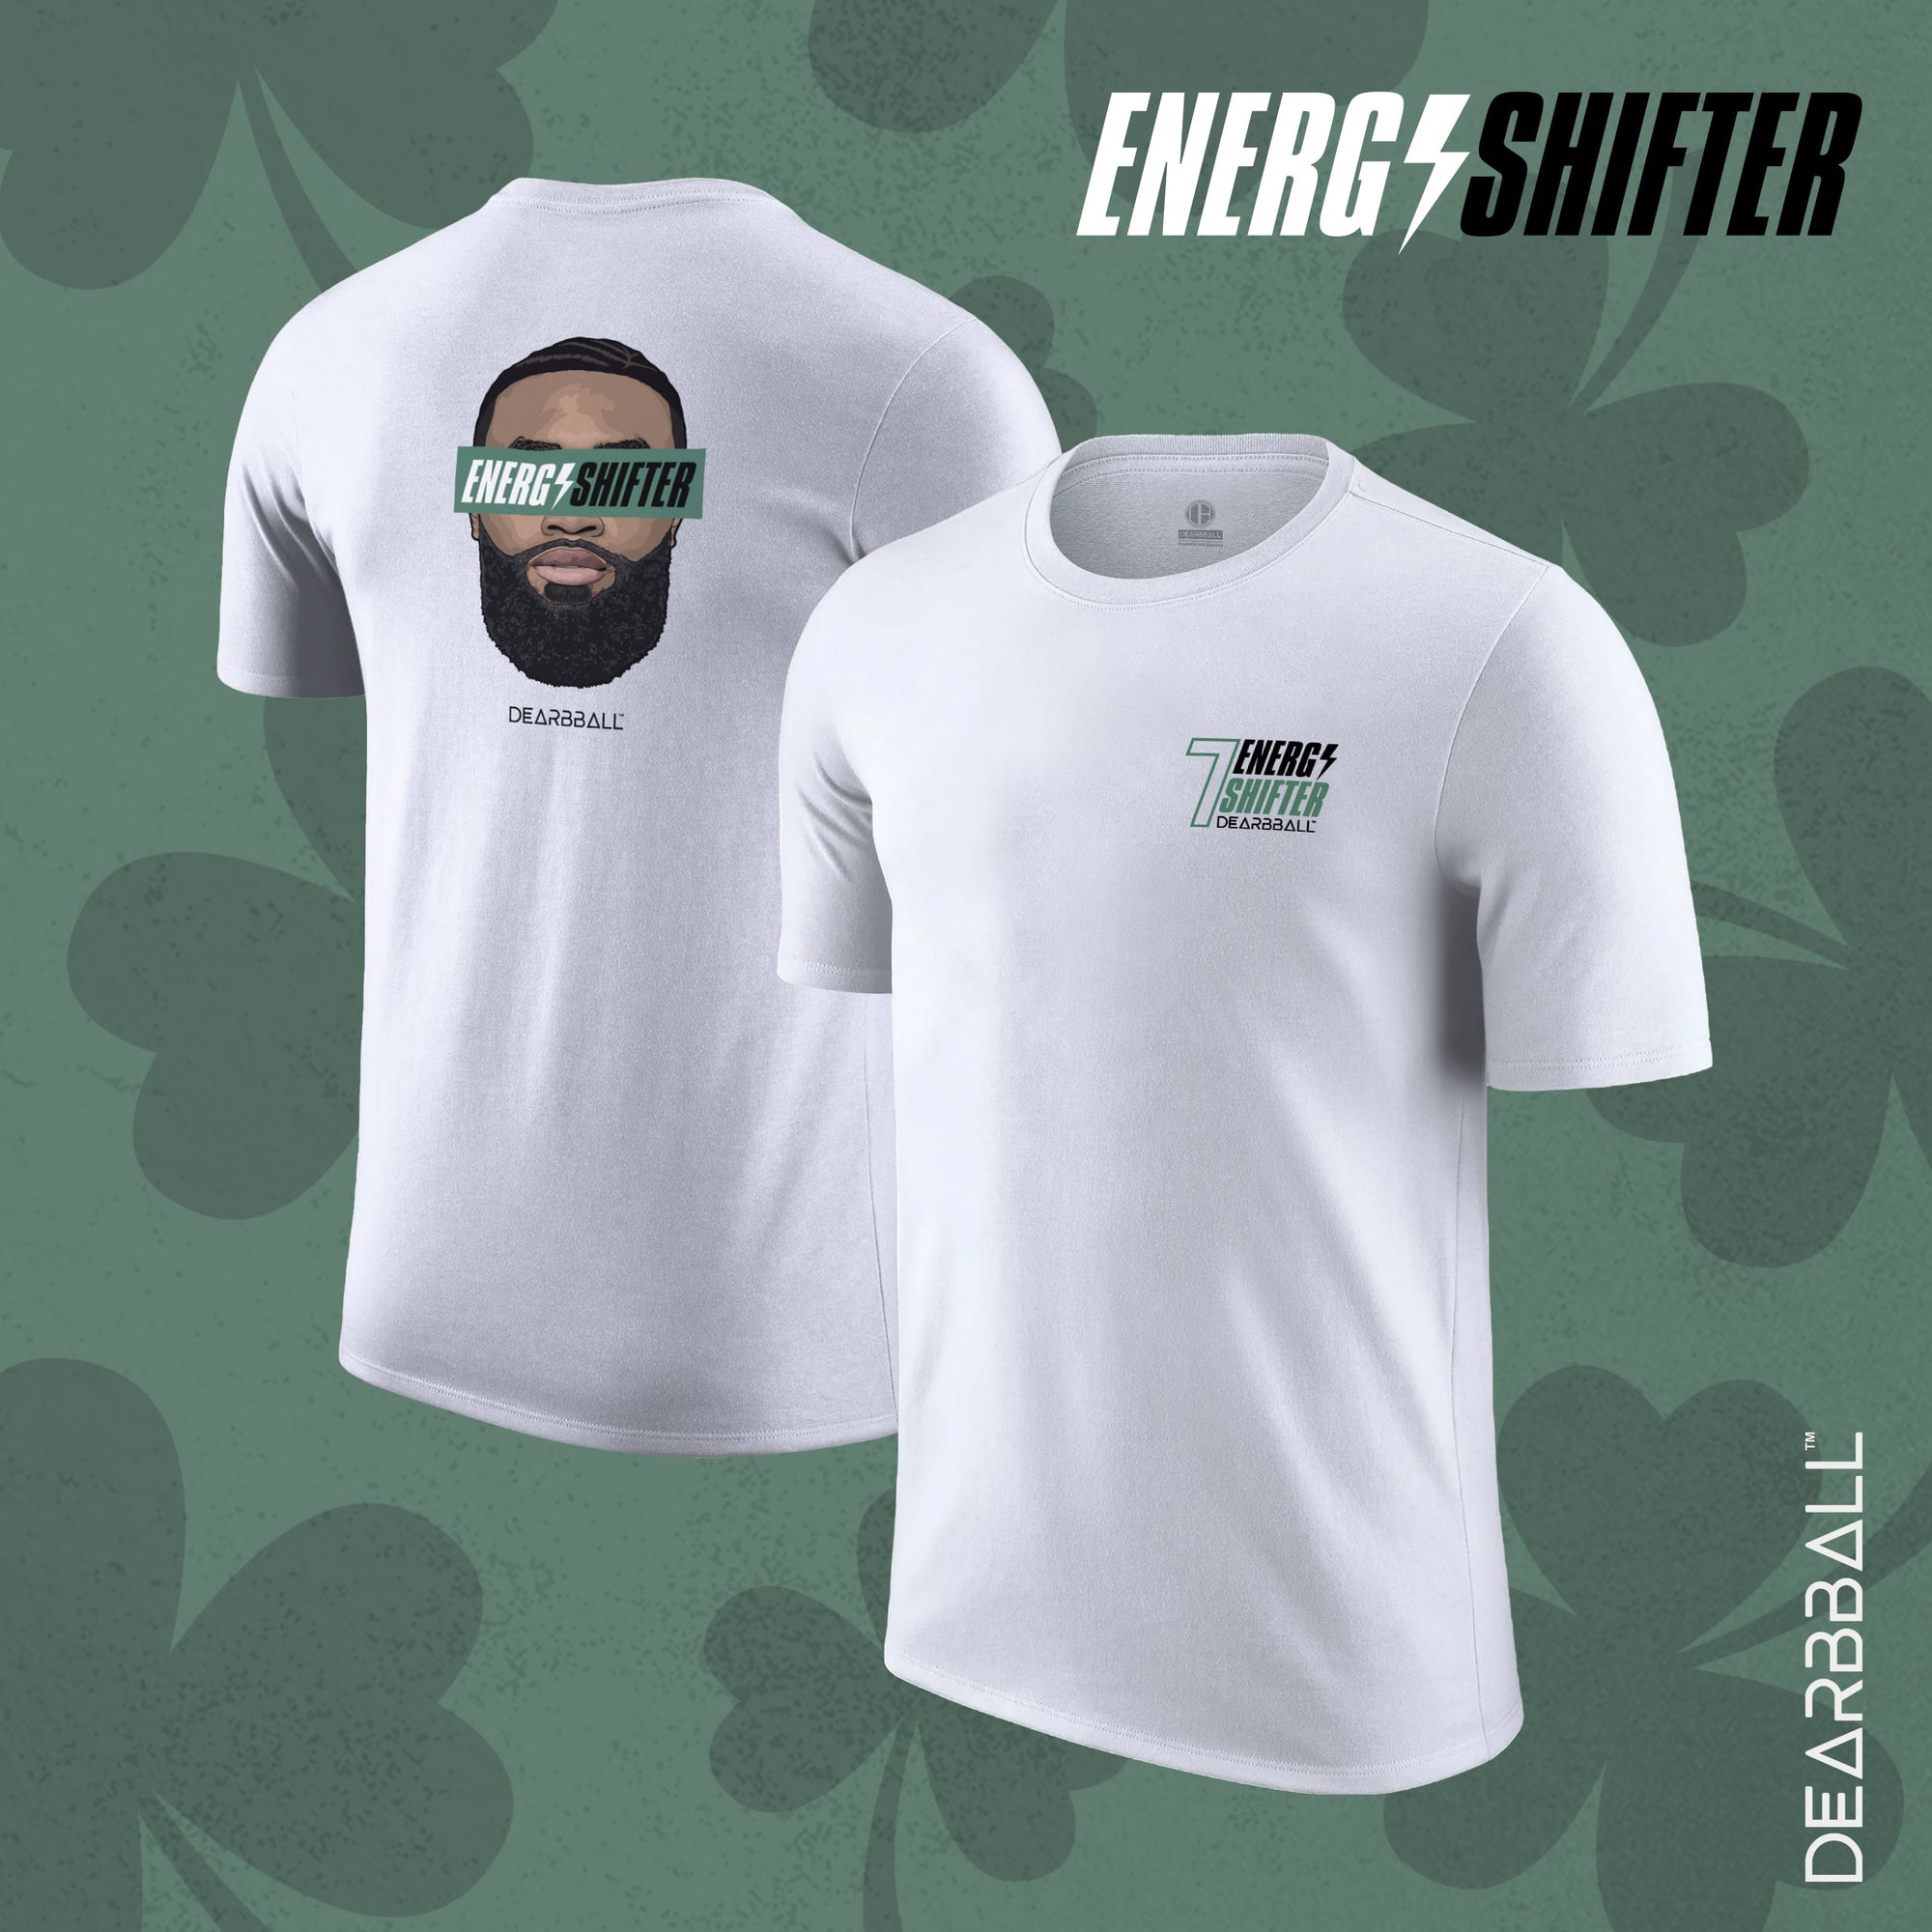 DearBBall T-Shirt - ENERGY SHIFTER Boston Patch Brodé Premium Edition